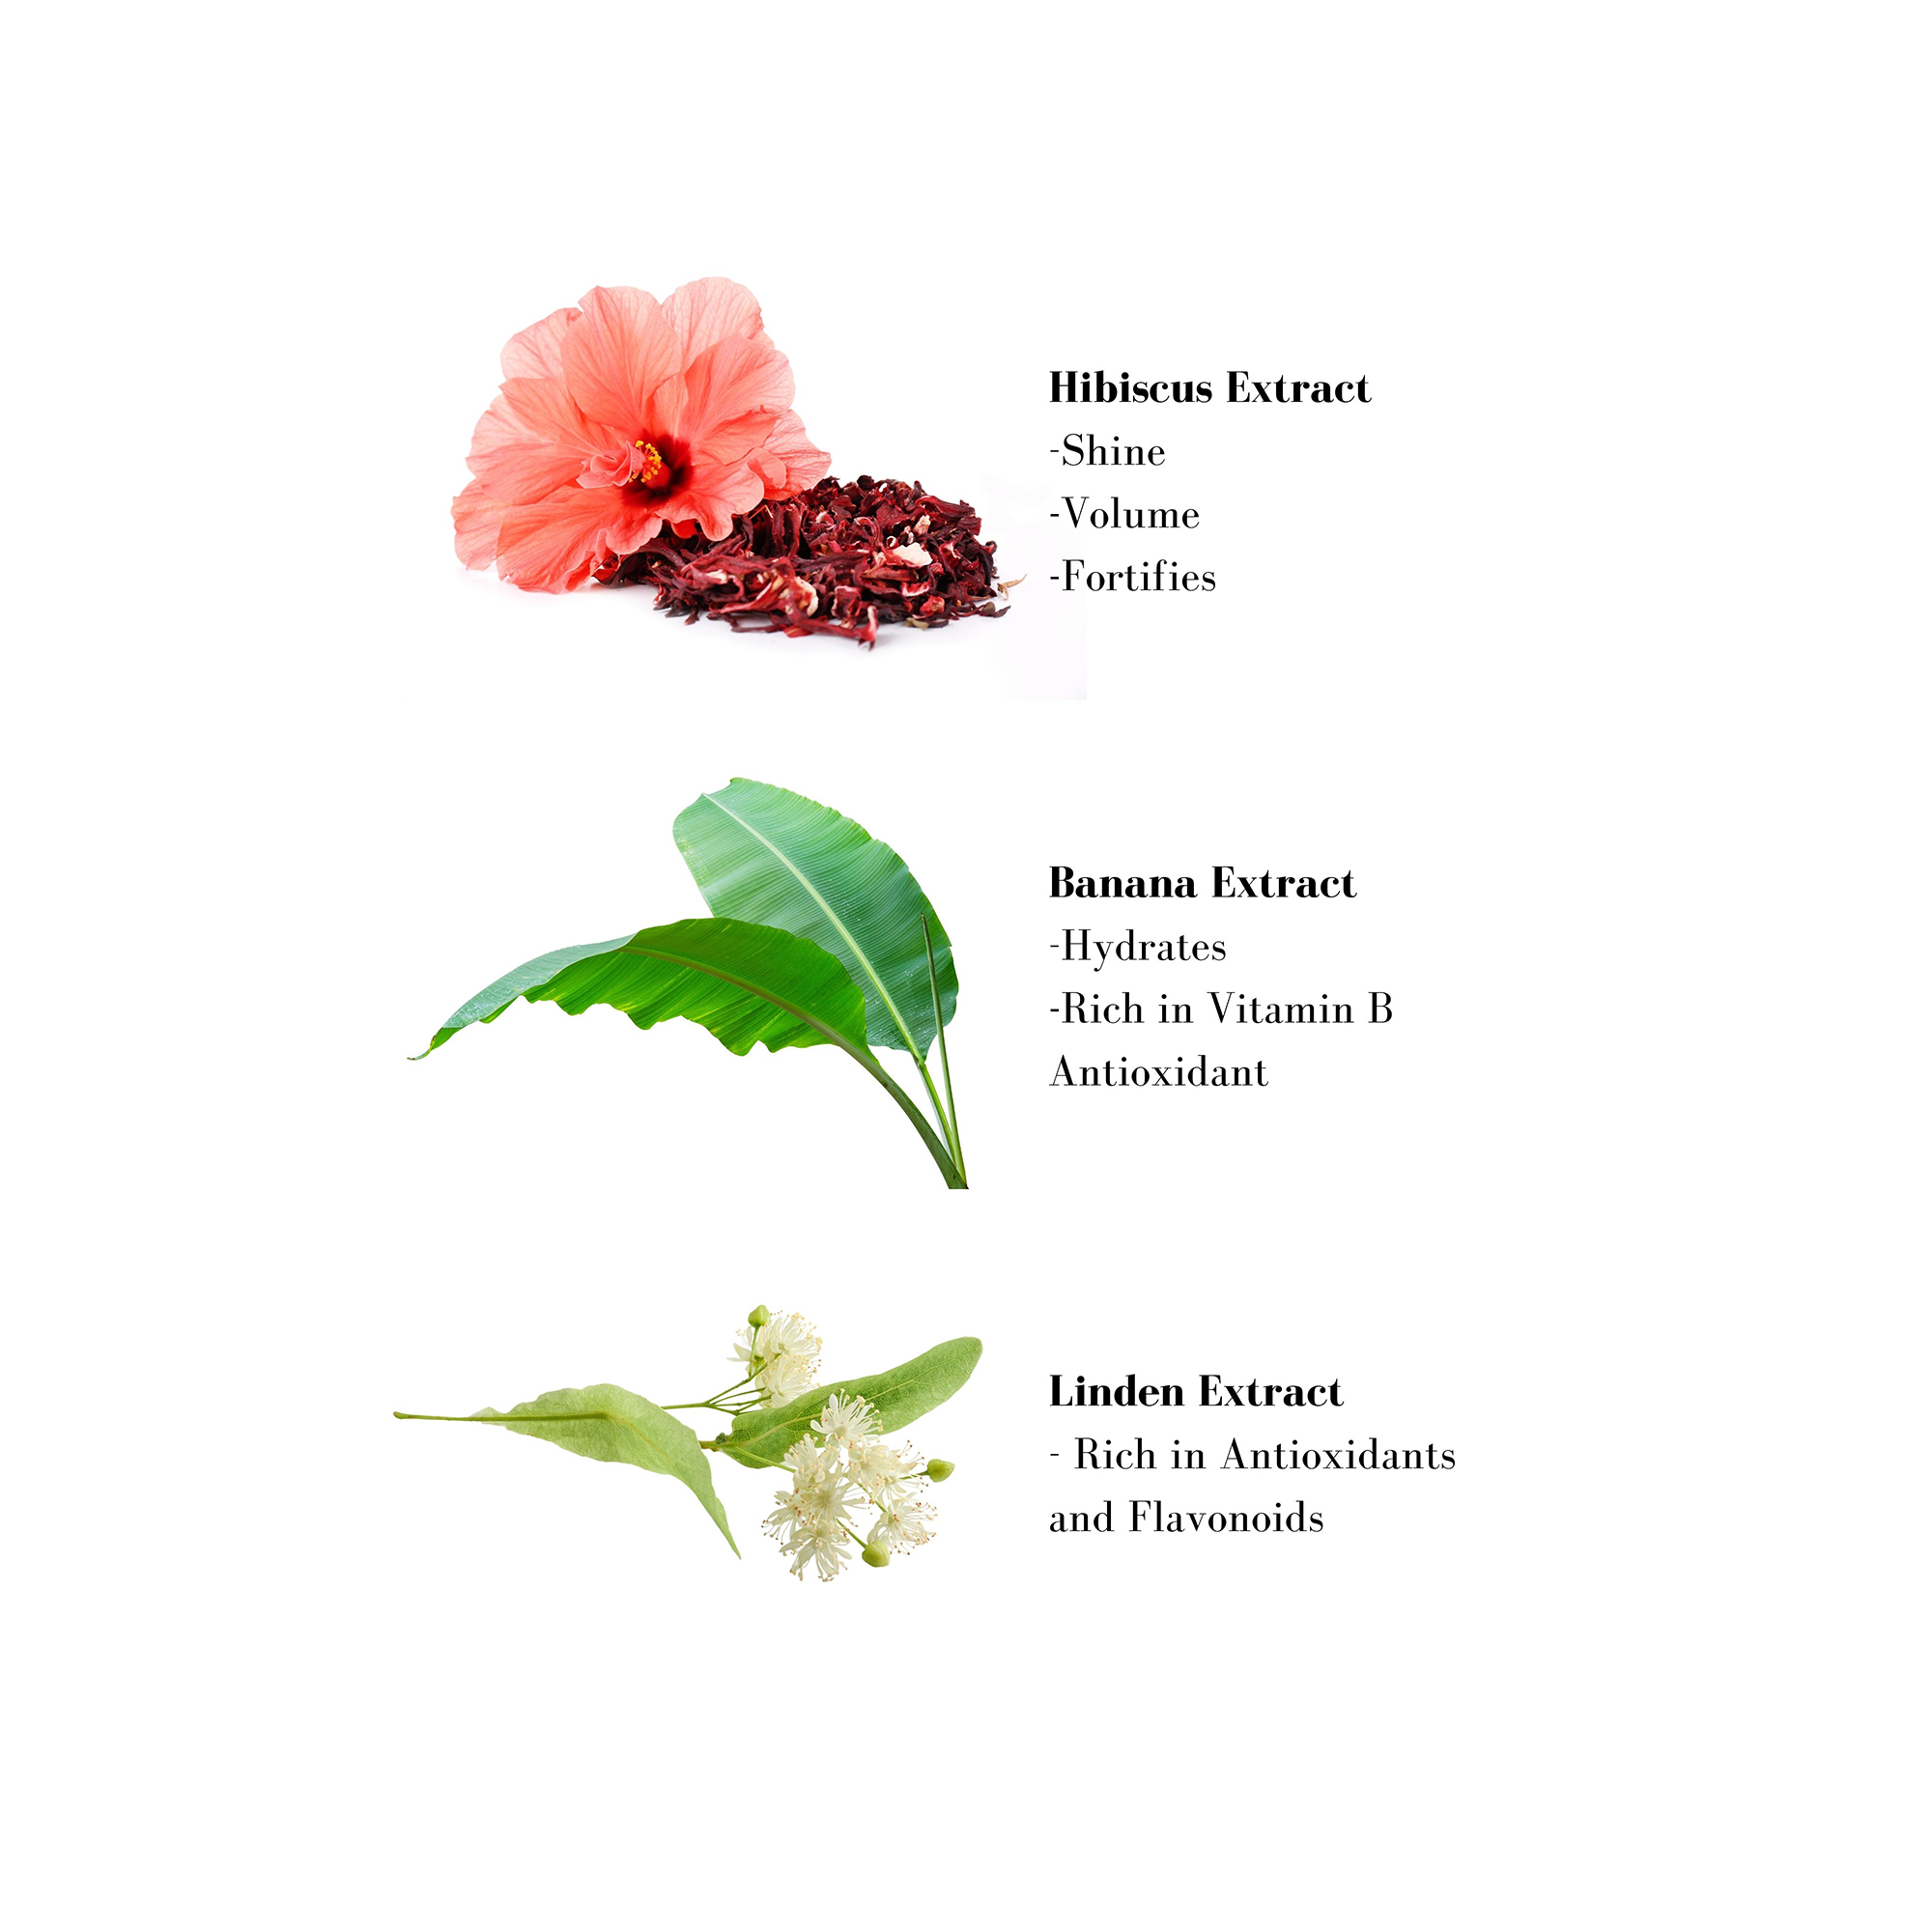 Image 1- Hibiscus Extract -Shine - Volume -Fortifies Banana Extract -Hydrates -Rich in Vitamin B Antioxidant Linden Extract - Rich in Antioxidants and Flavonoids